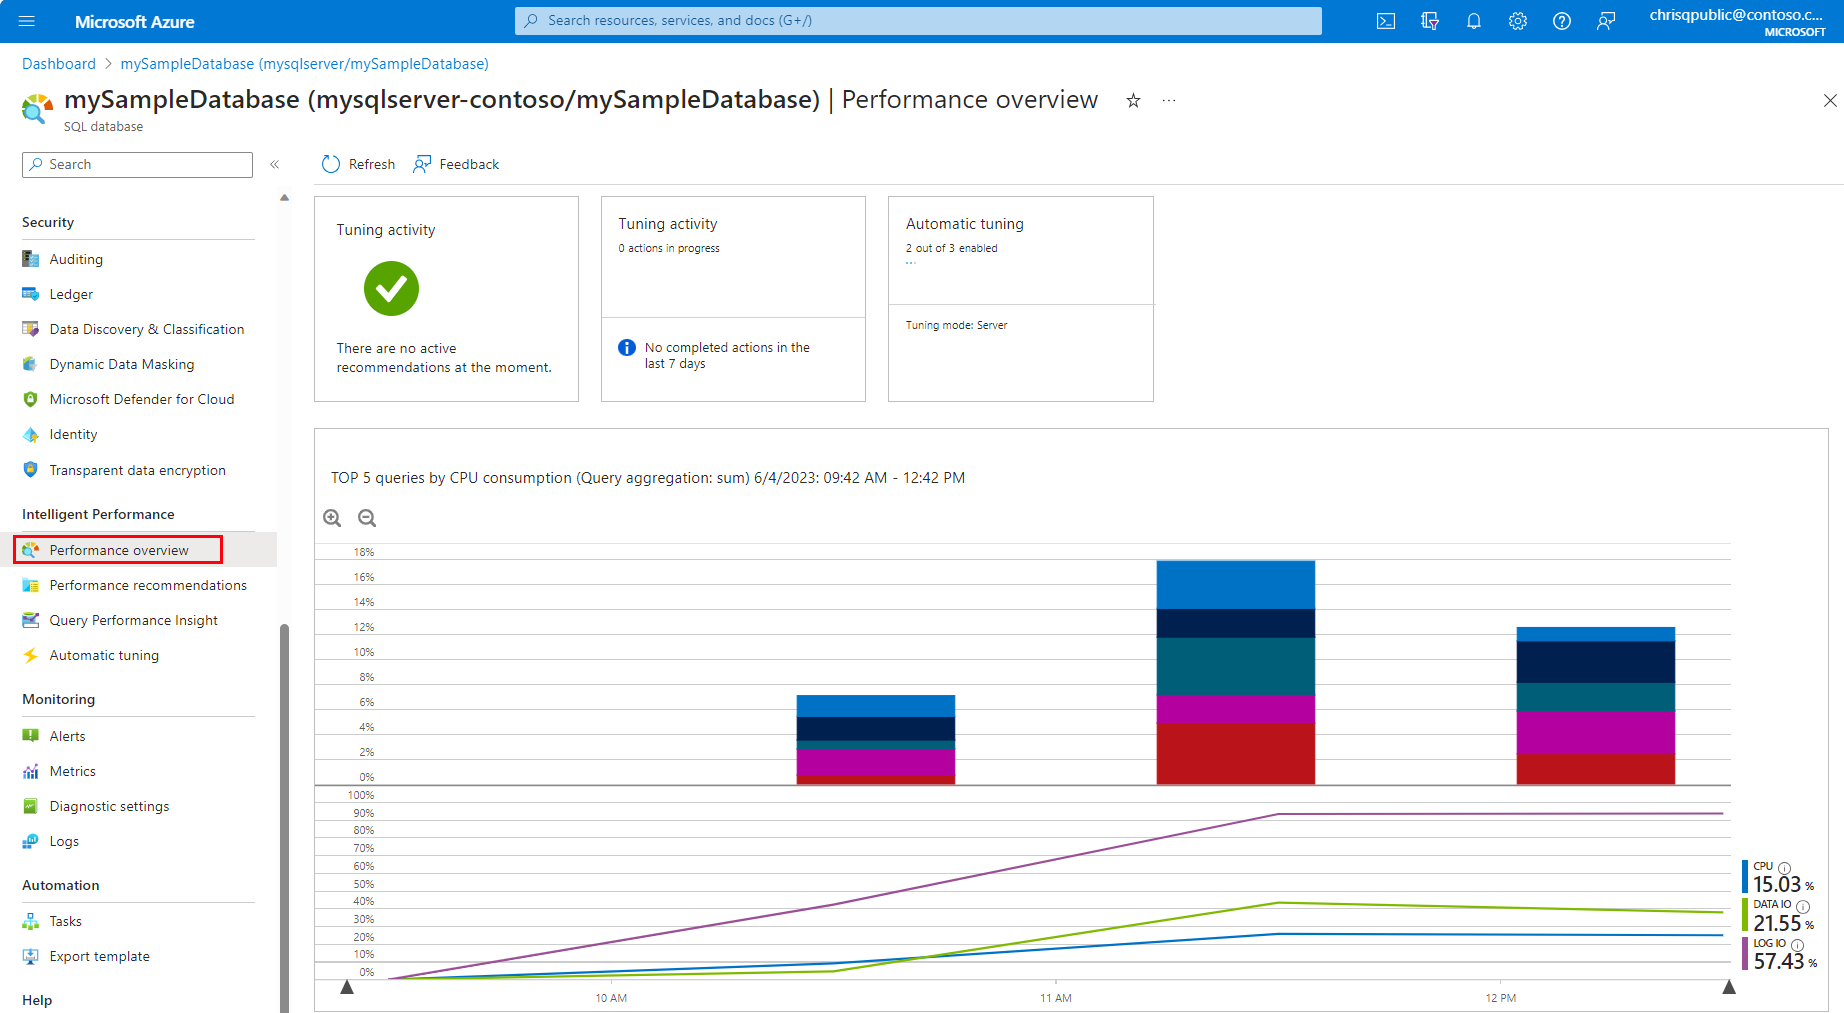 Screenshot from the Azure portal of the Performance Overview for Azure SQL Database.